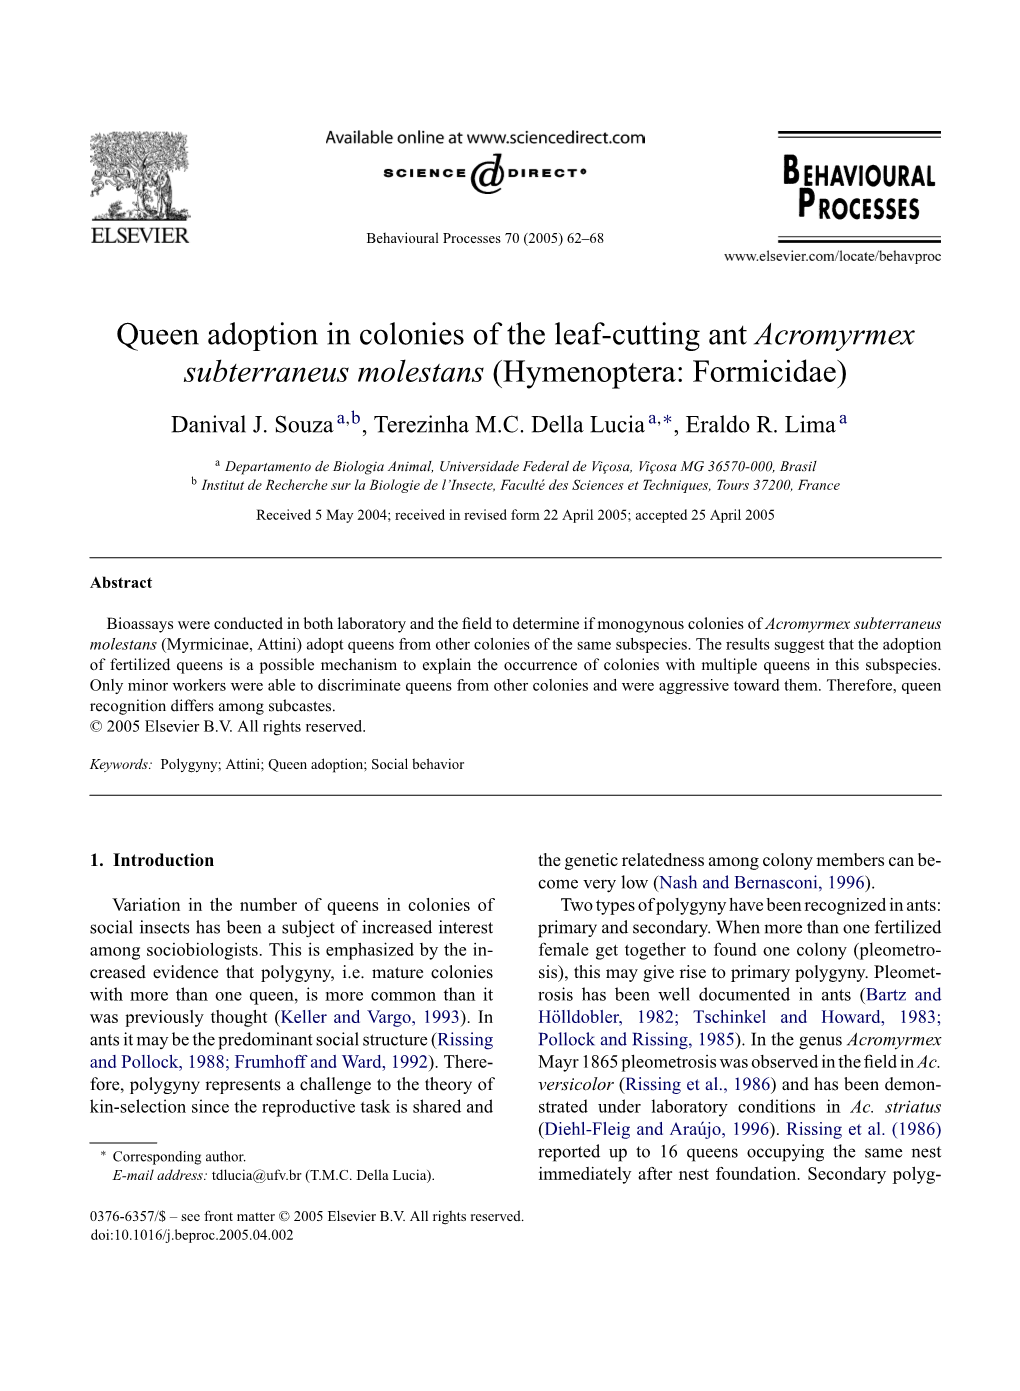 Queen Adoption in Colonies of the Leaf-Cutting Ant Acromyrmex Subterraneus Molestans (Hymenoptera: Formicidae)